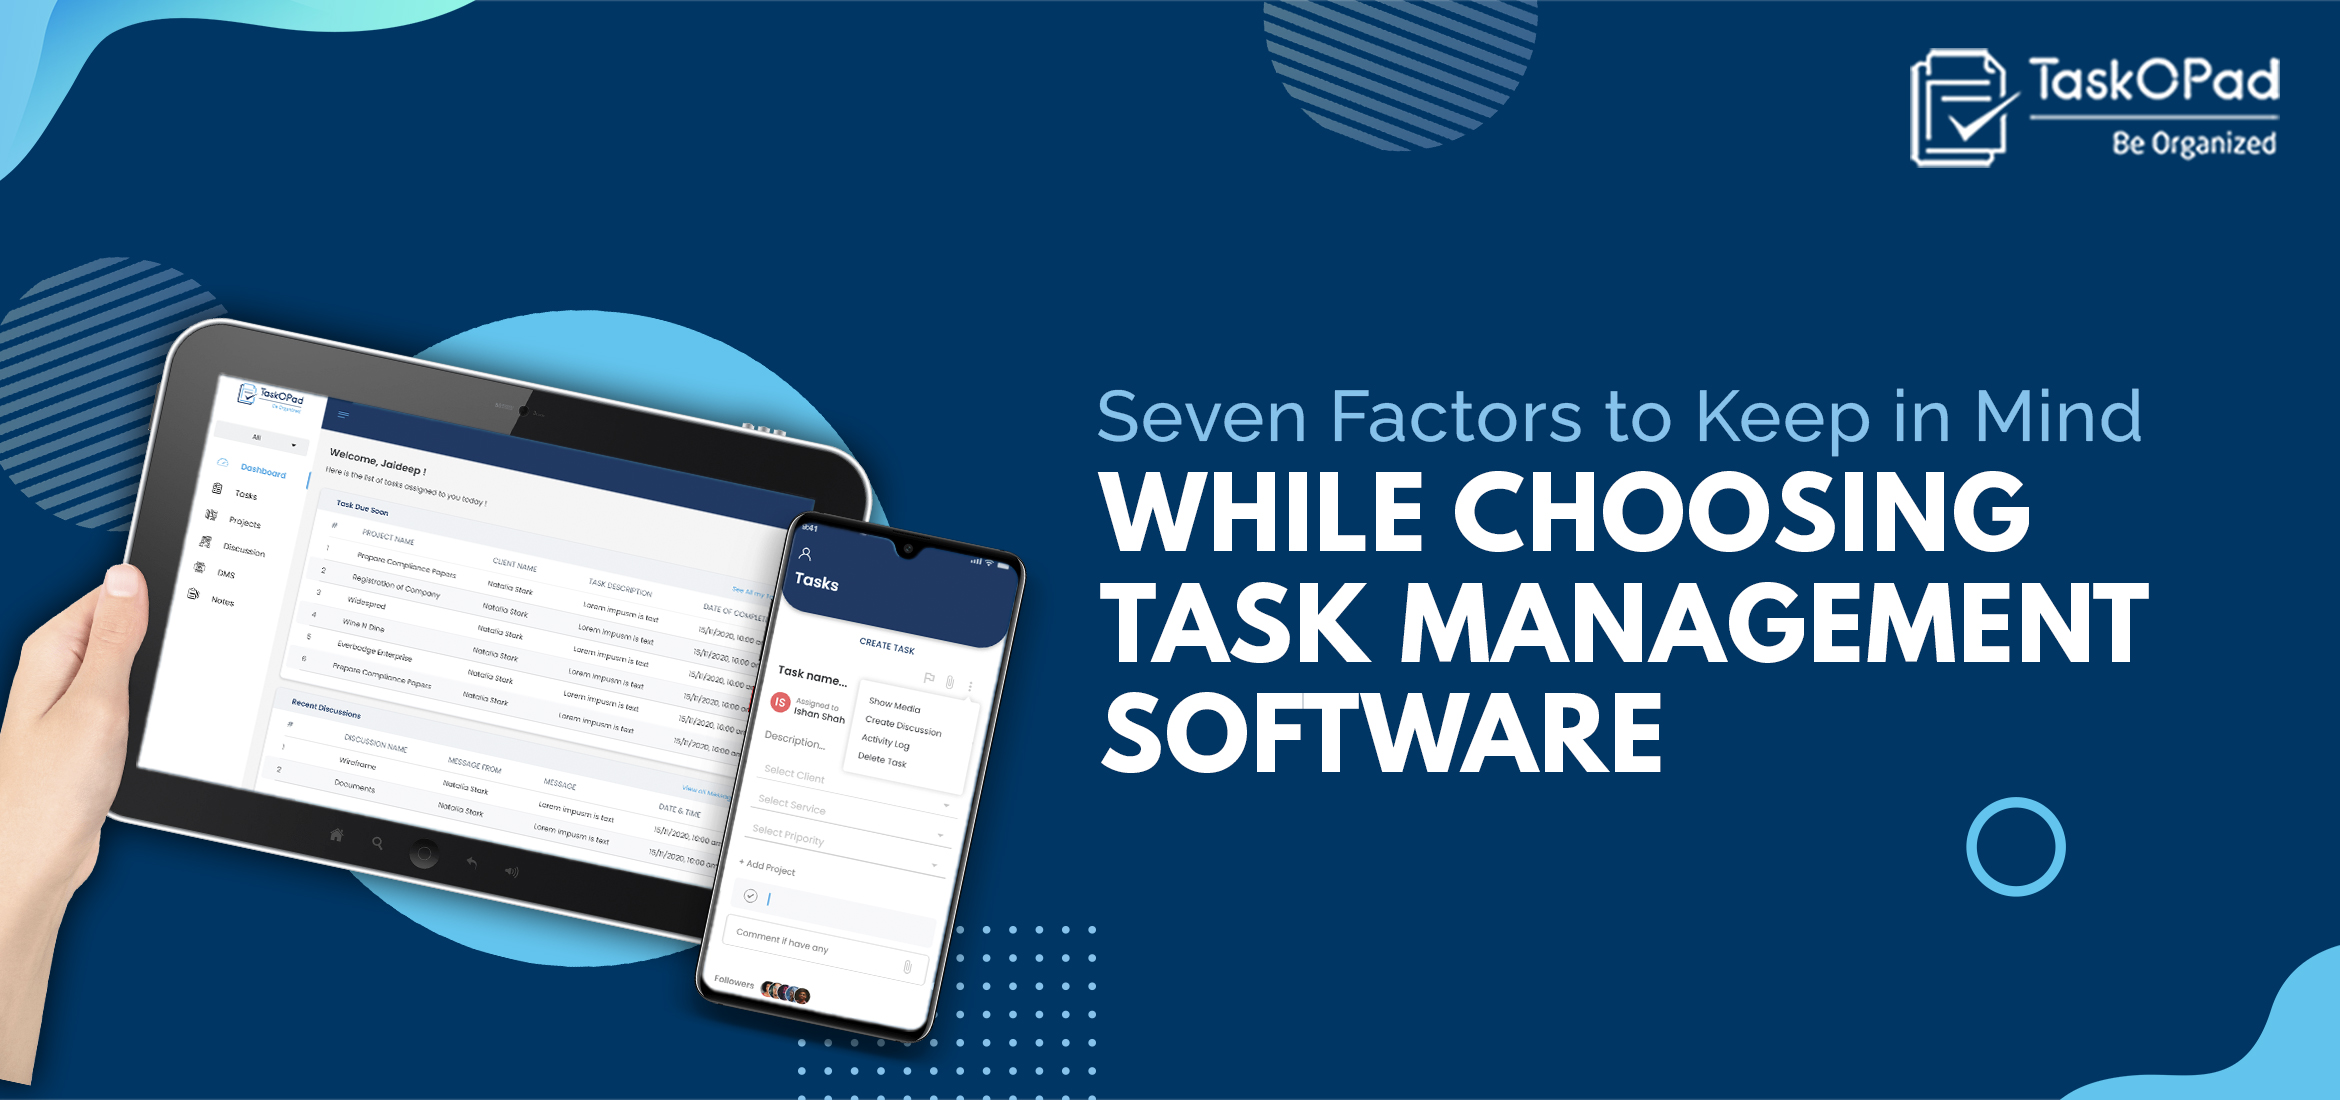 Seven Factors to Keep in Mind while Choosing Task Management Software